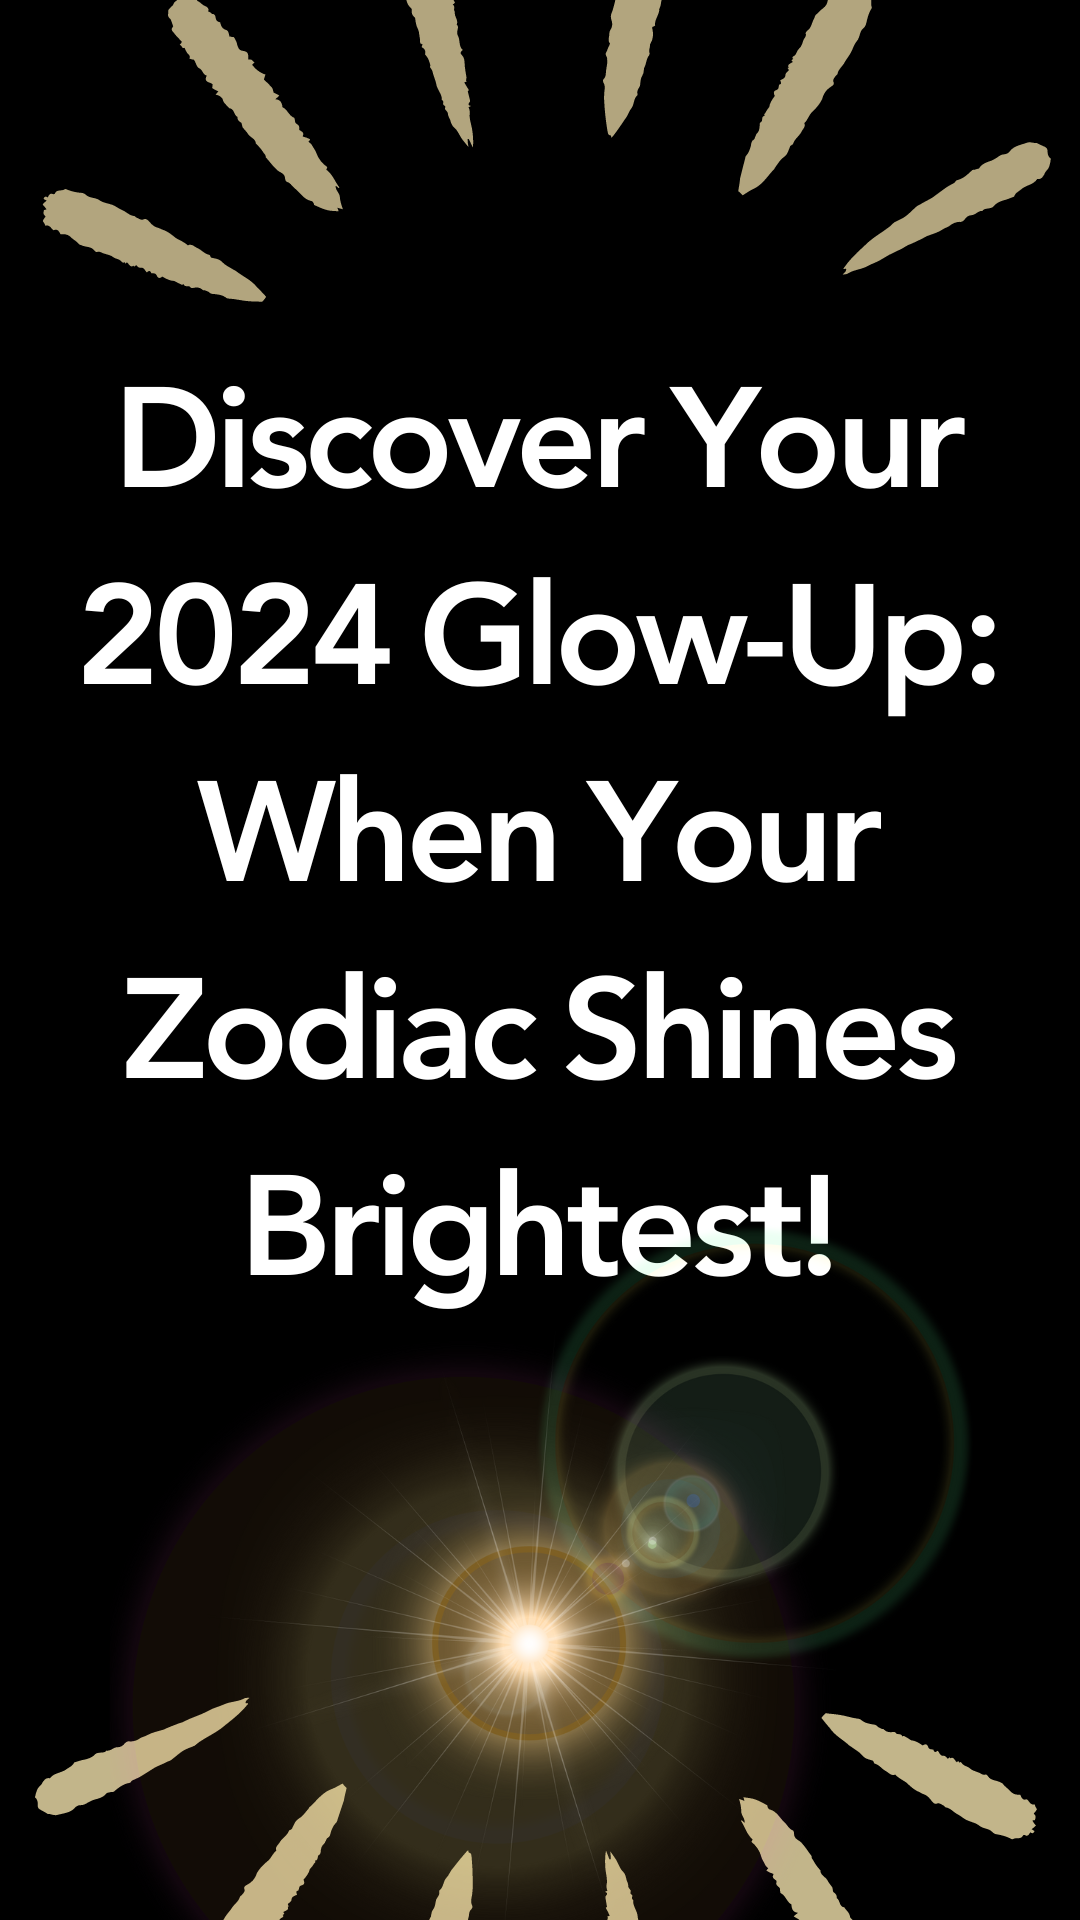 Discover Your 2024 Glow-Up: When Your Zodiac Shines Brightest!